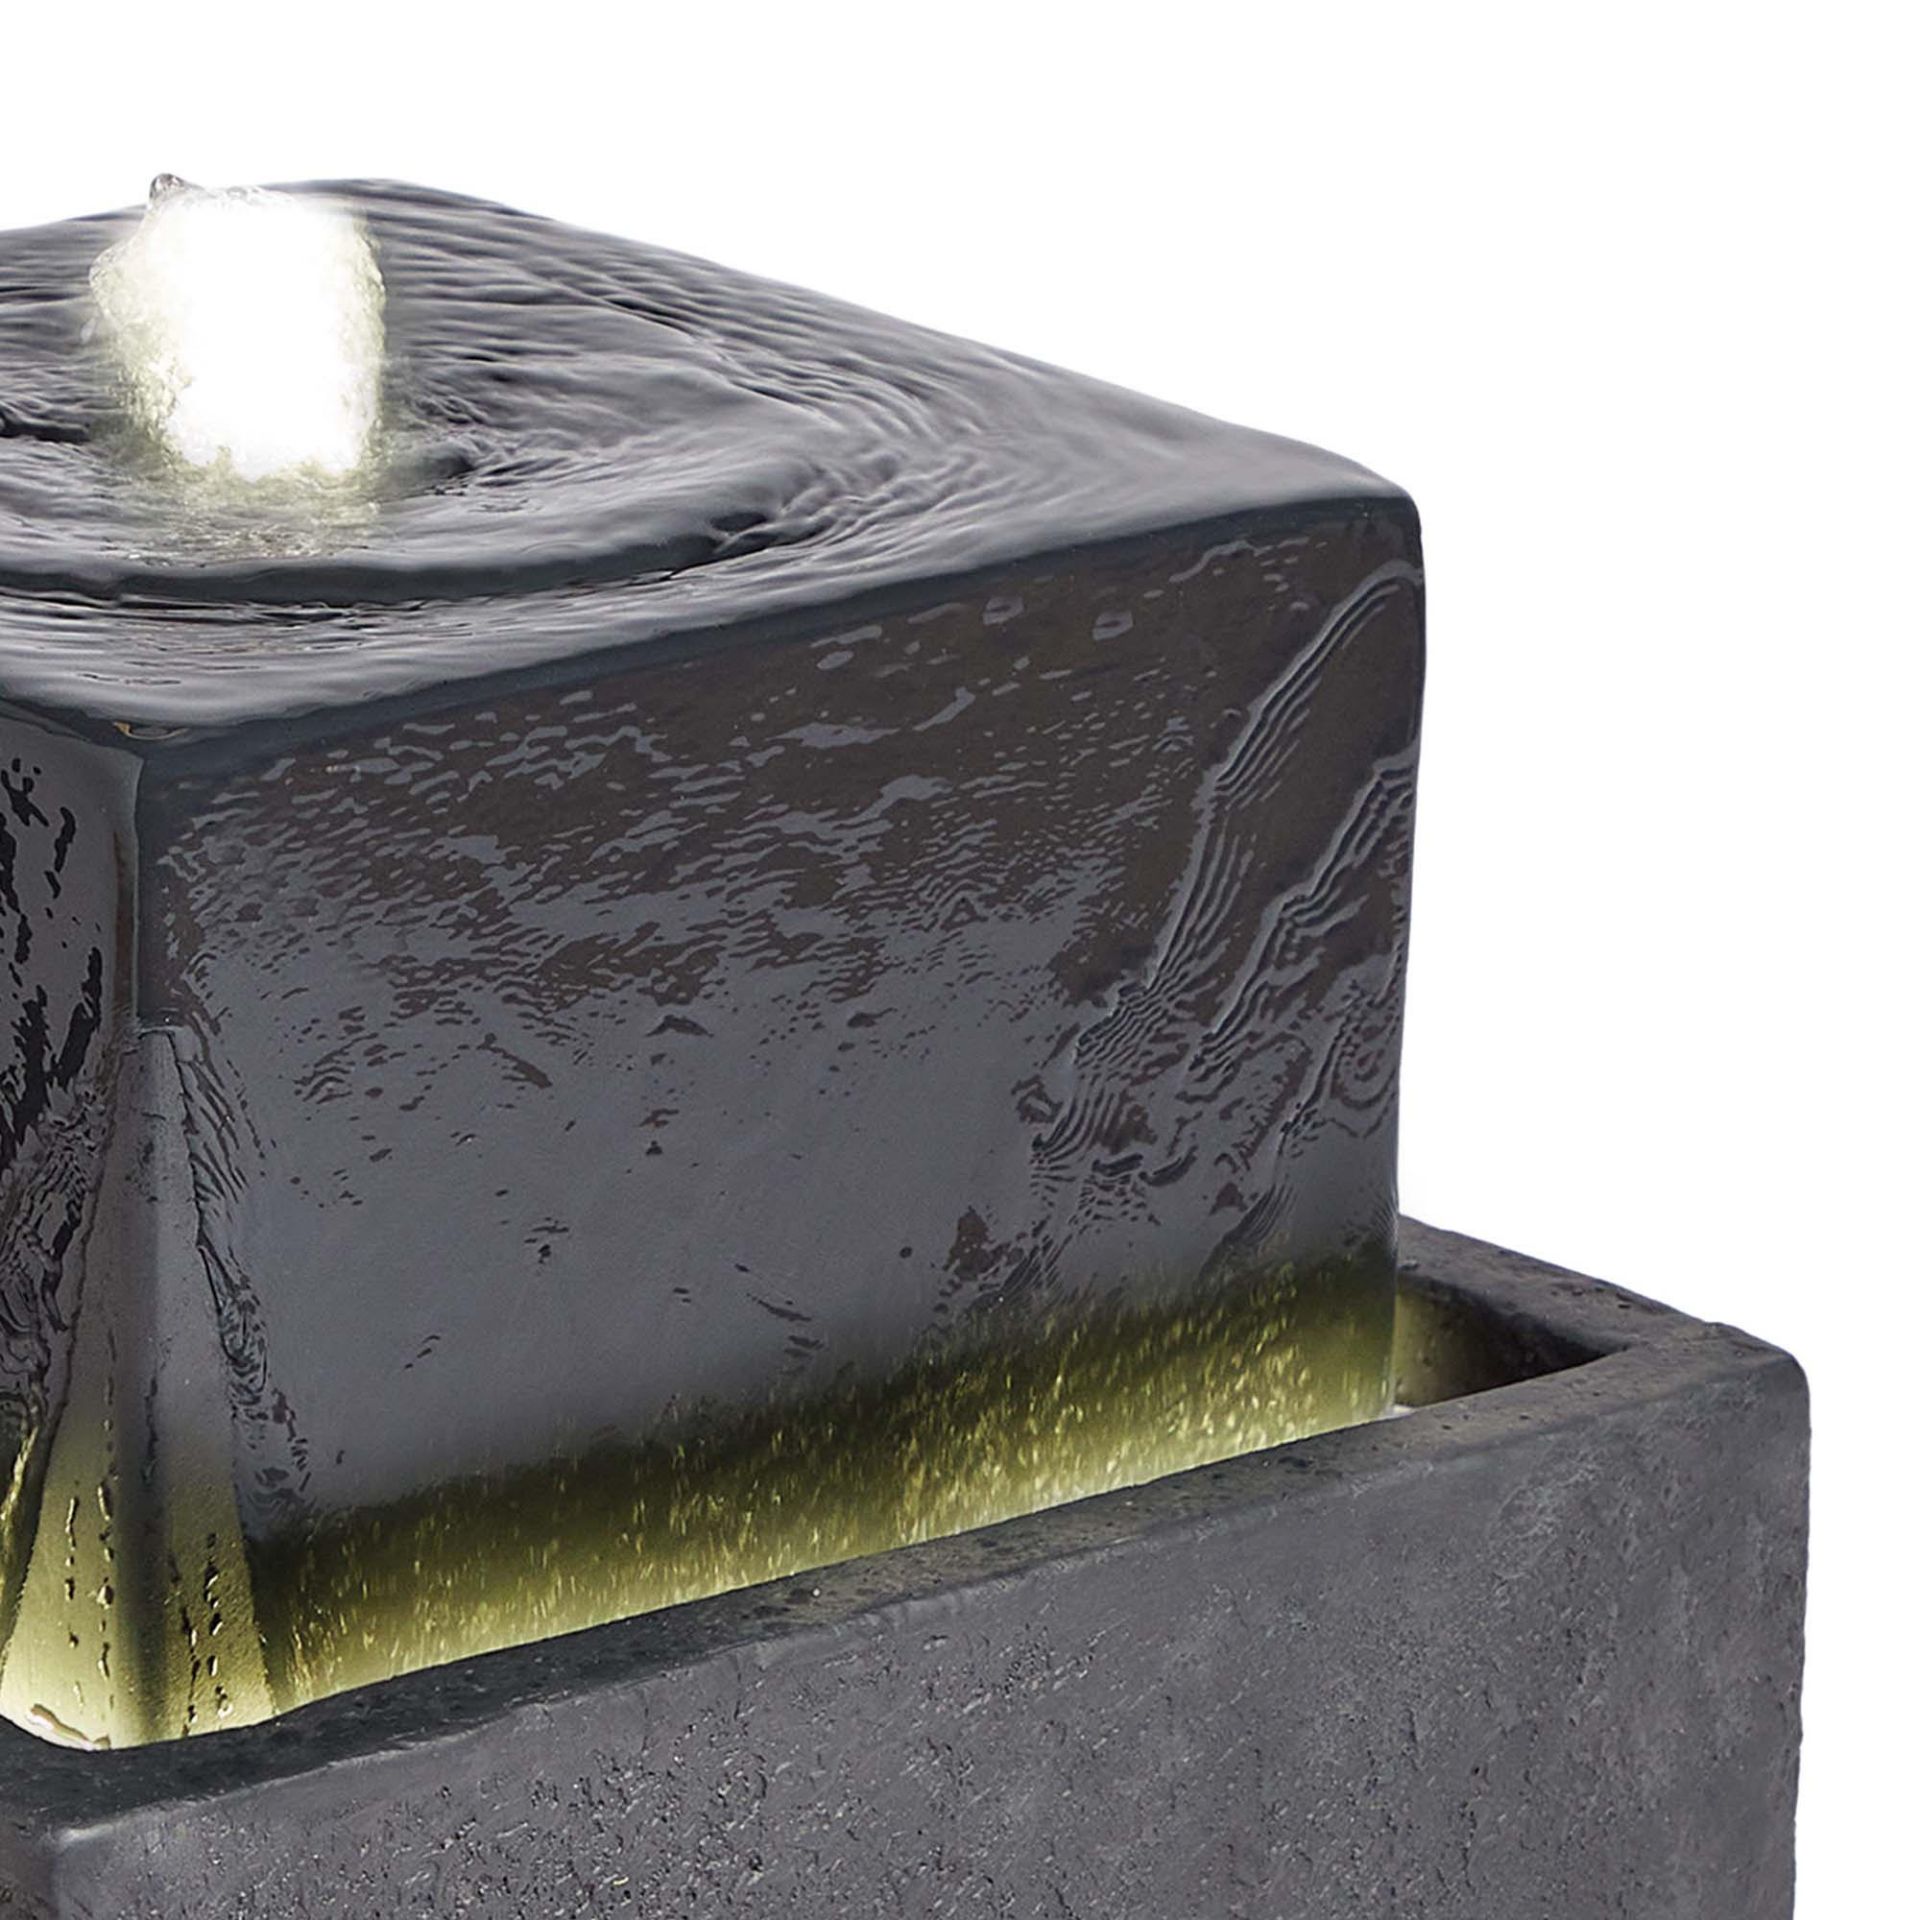 PALLET TO CONTAIN 12 x New & Boxed Square 2 Tier Water Feature. RRP £299.99 EACH. (REF671) – - Image 3 of 6